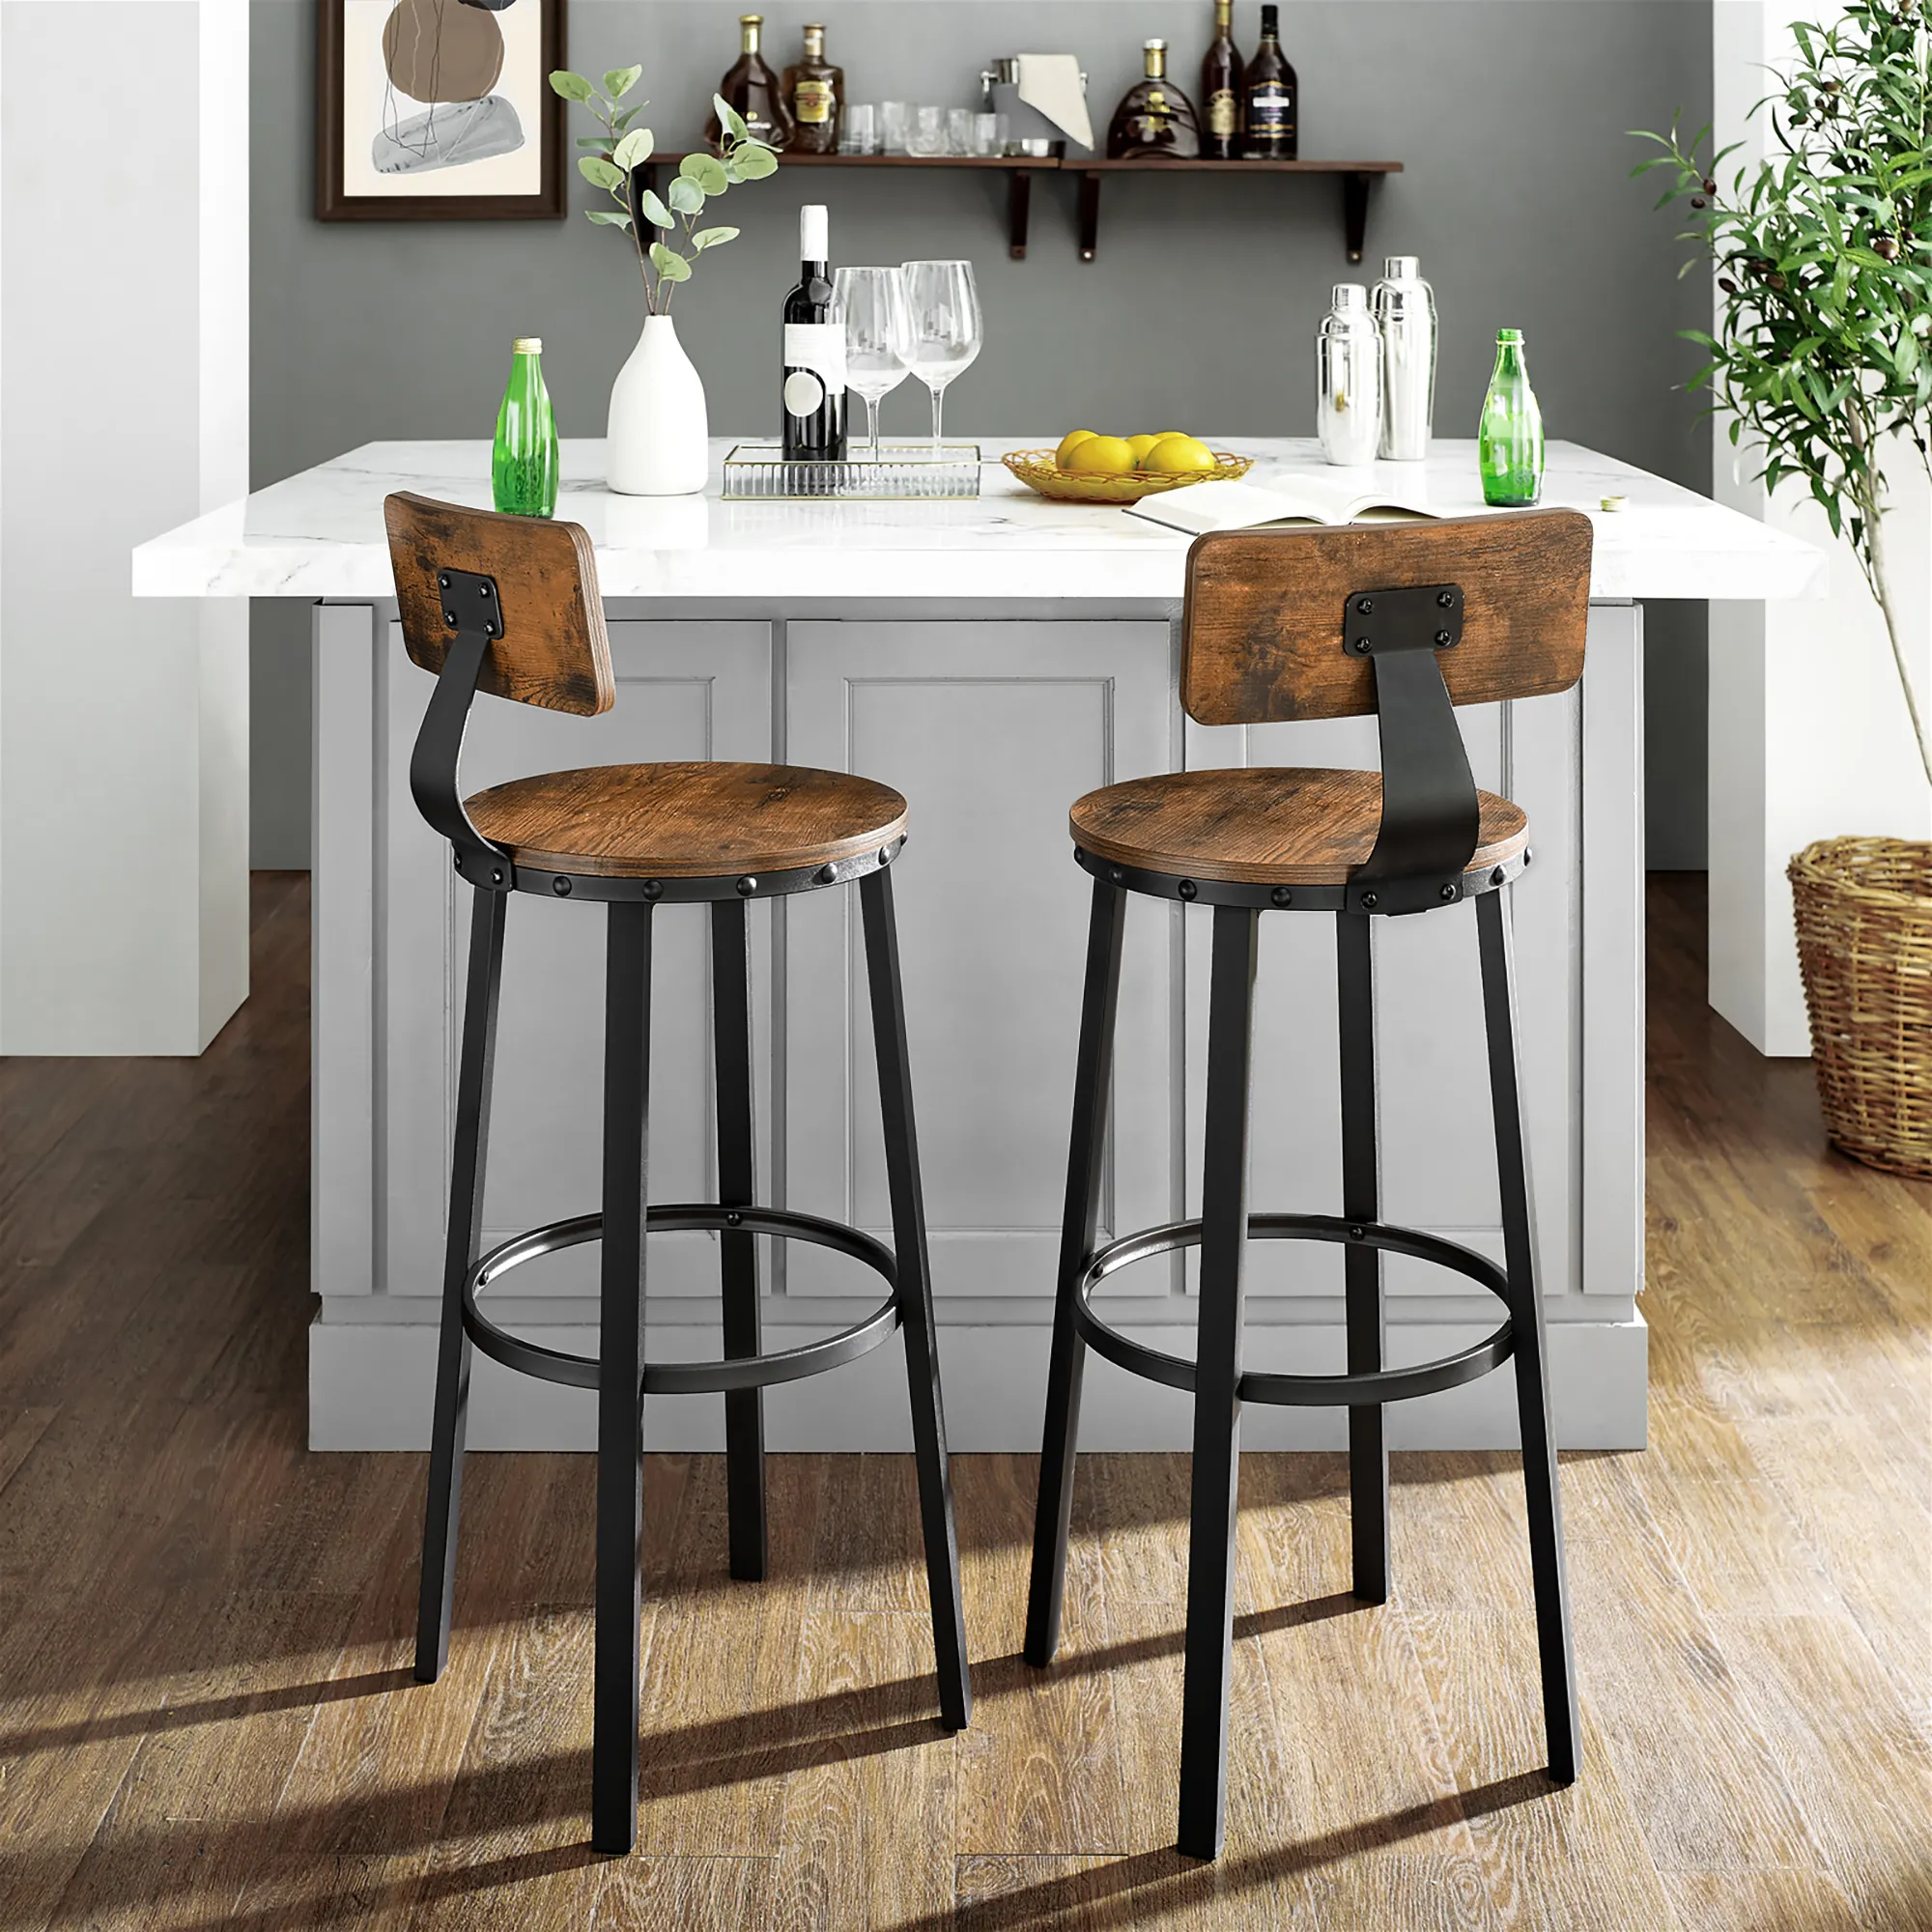 VASAGLE 2pcs Industrial Design Metal Frame Wooden Seat 39" height high bar stool chair for Restaurant Kitchen and dining Bar